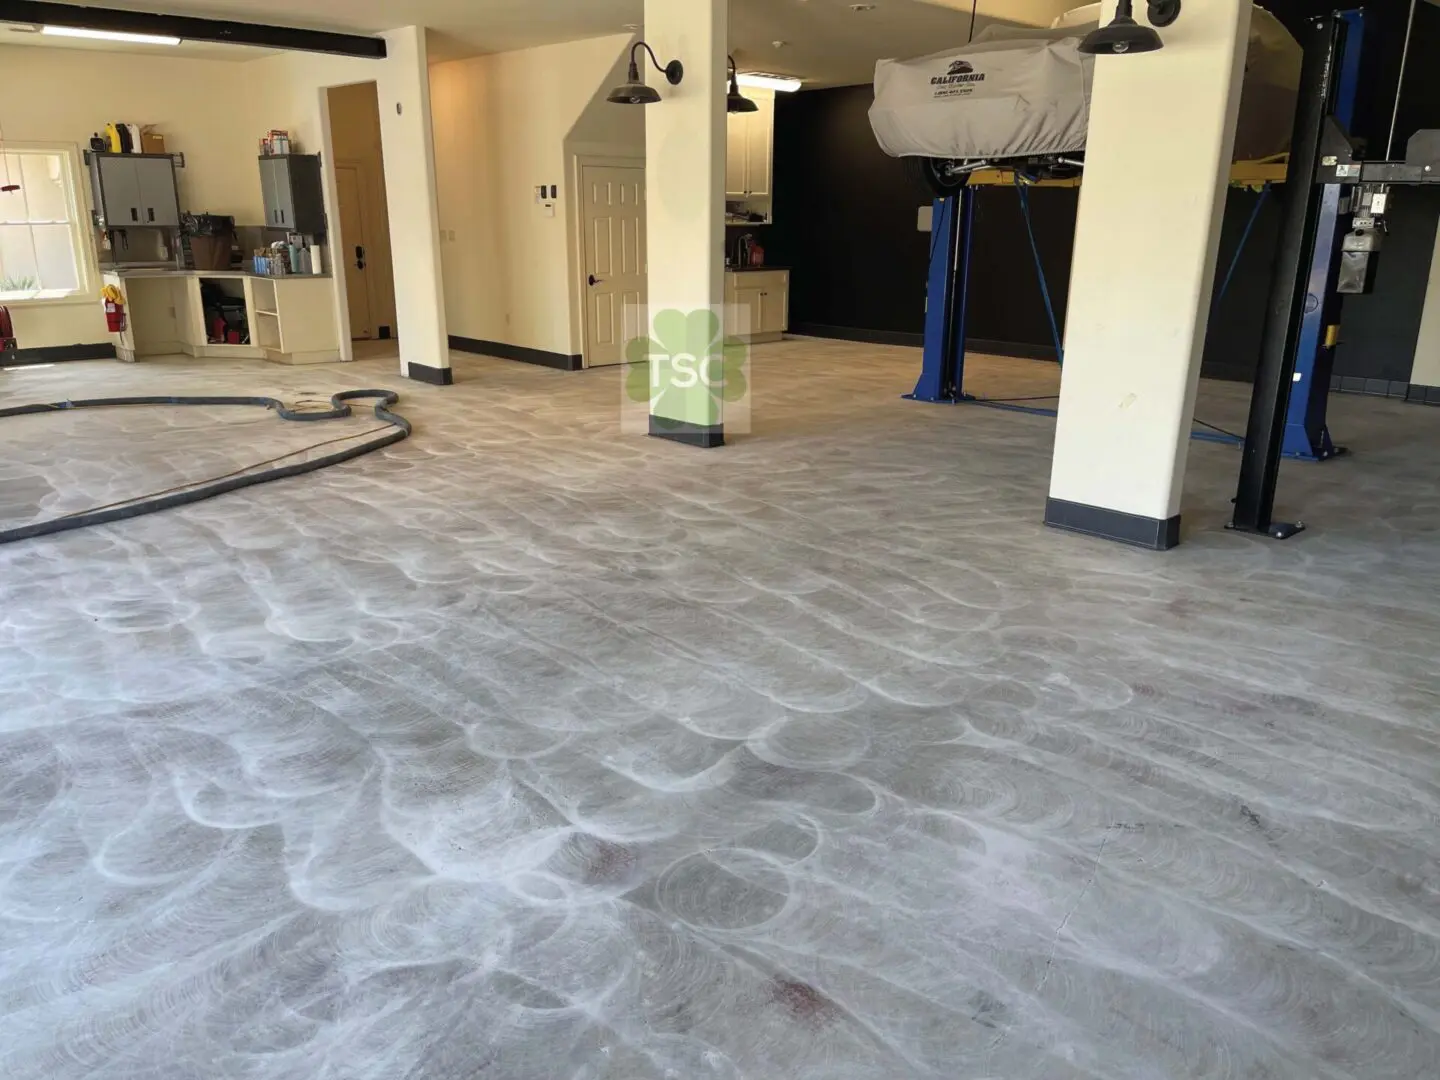 Request a Quote for Flooring